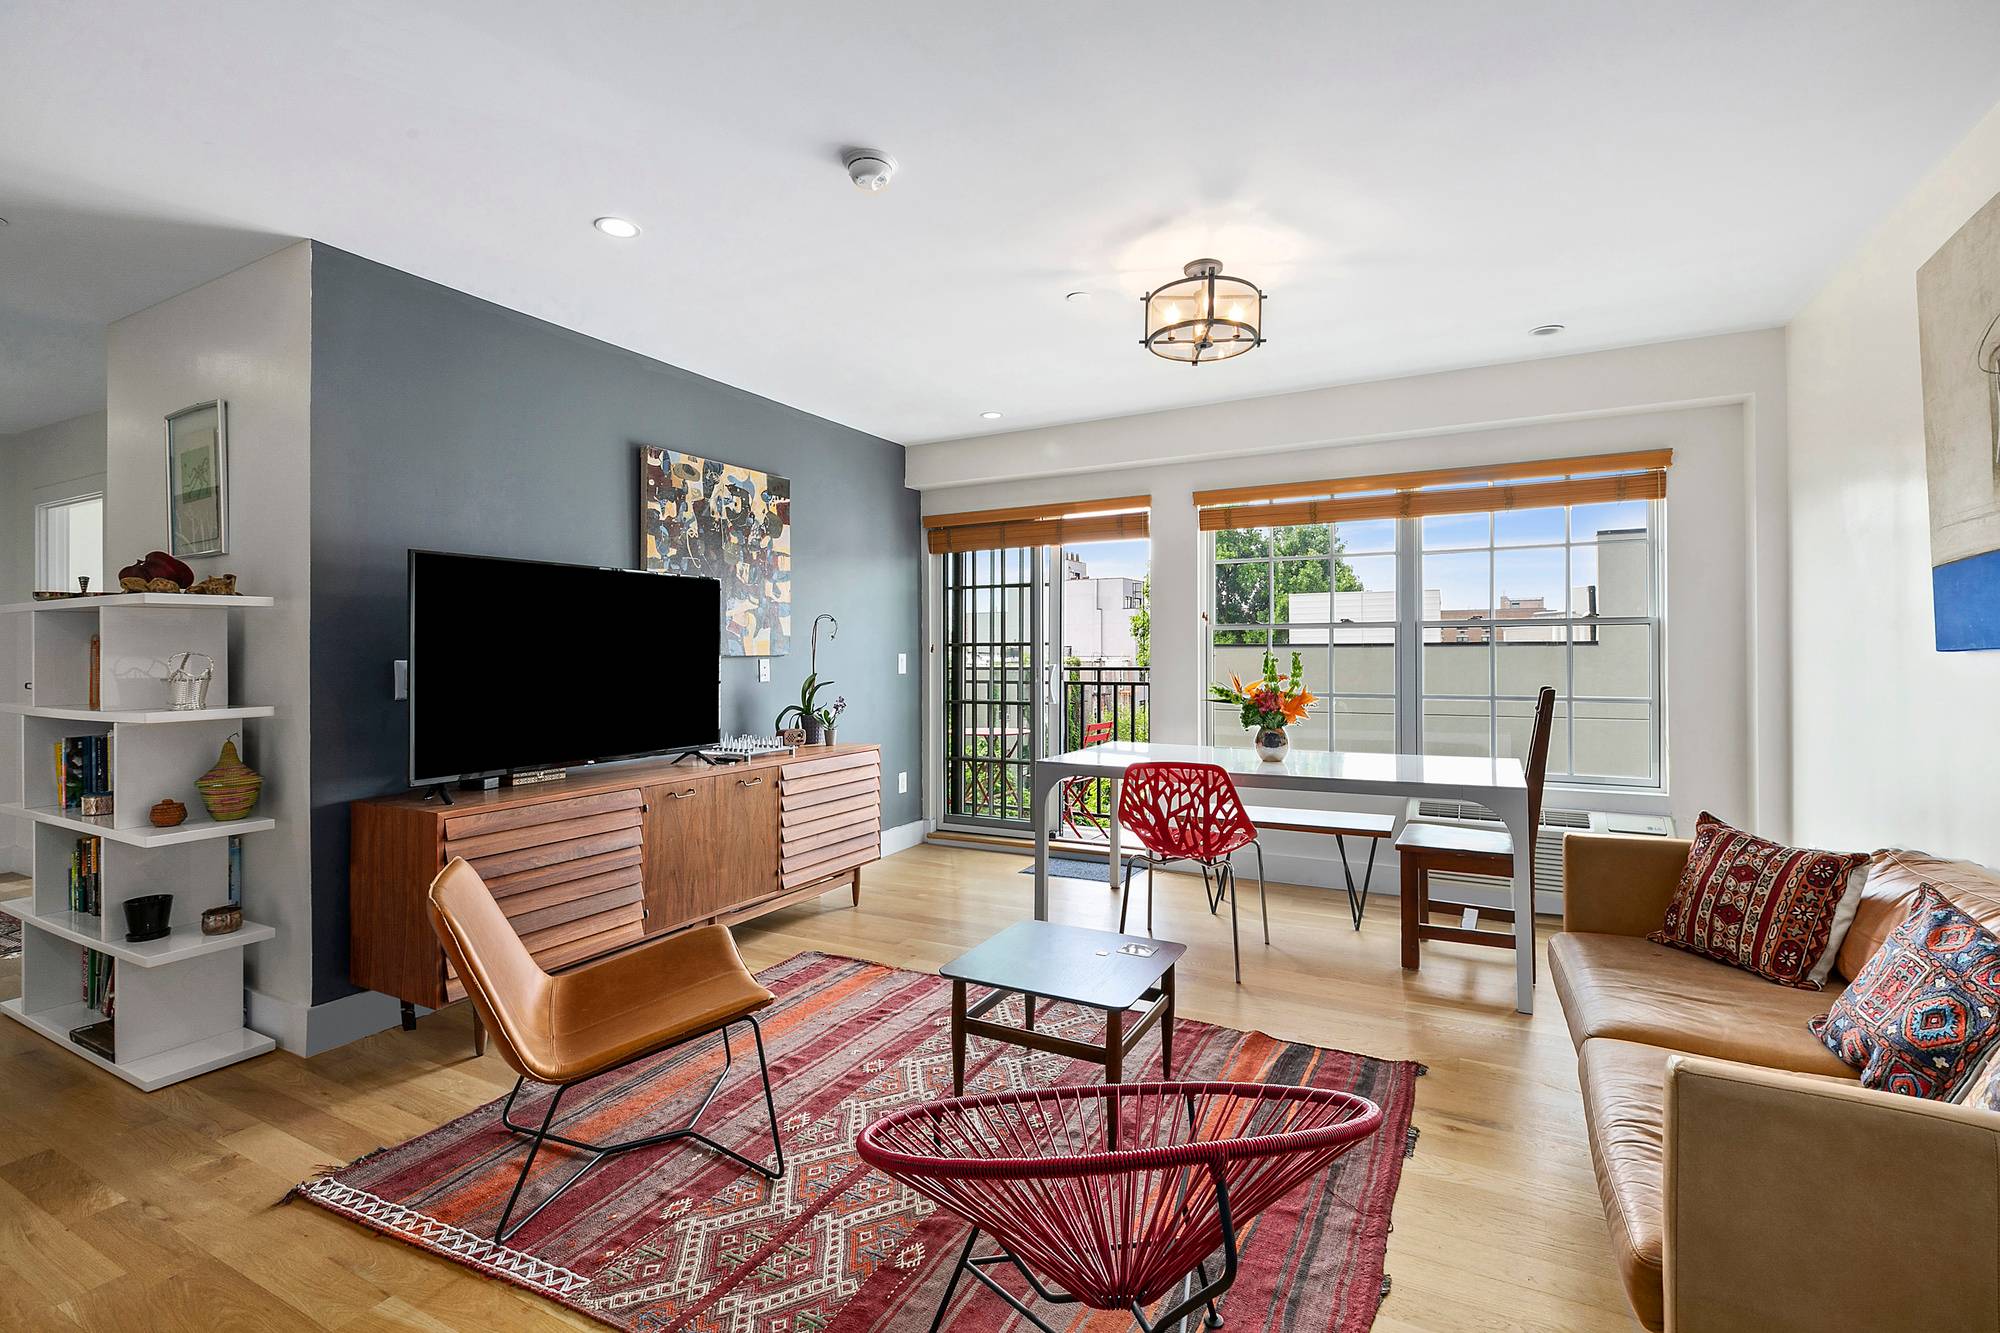 Be among the first to live in this well thought out two bedroom, one bathroom condo that's flooded with natural light and features two south facing balconies.